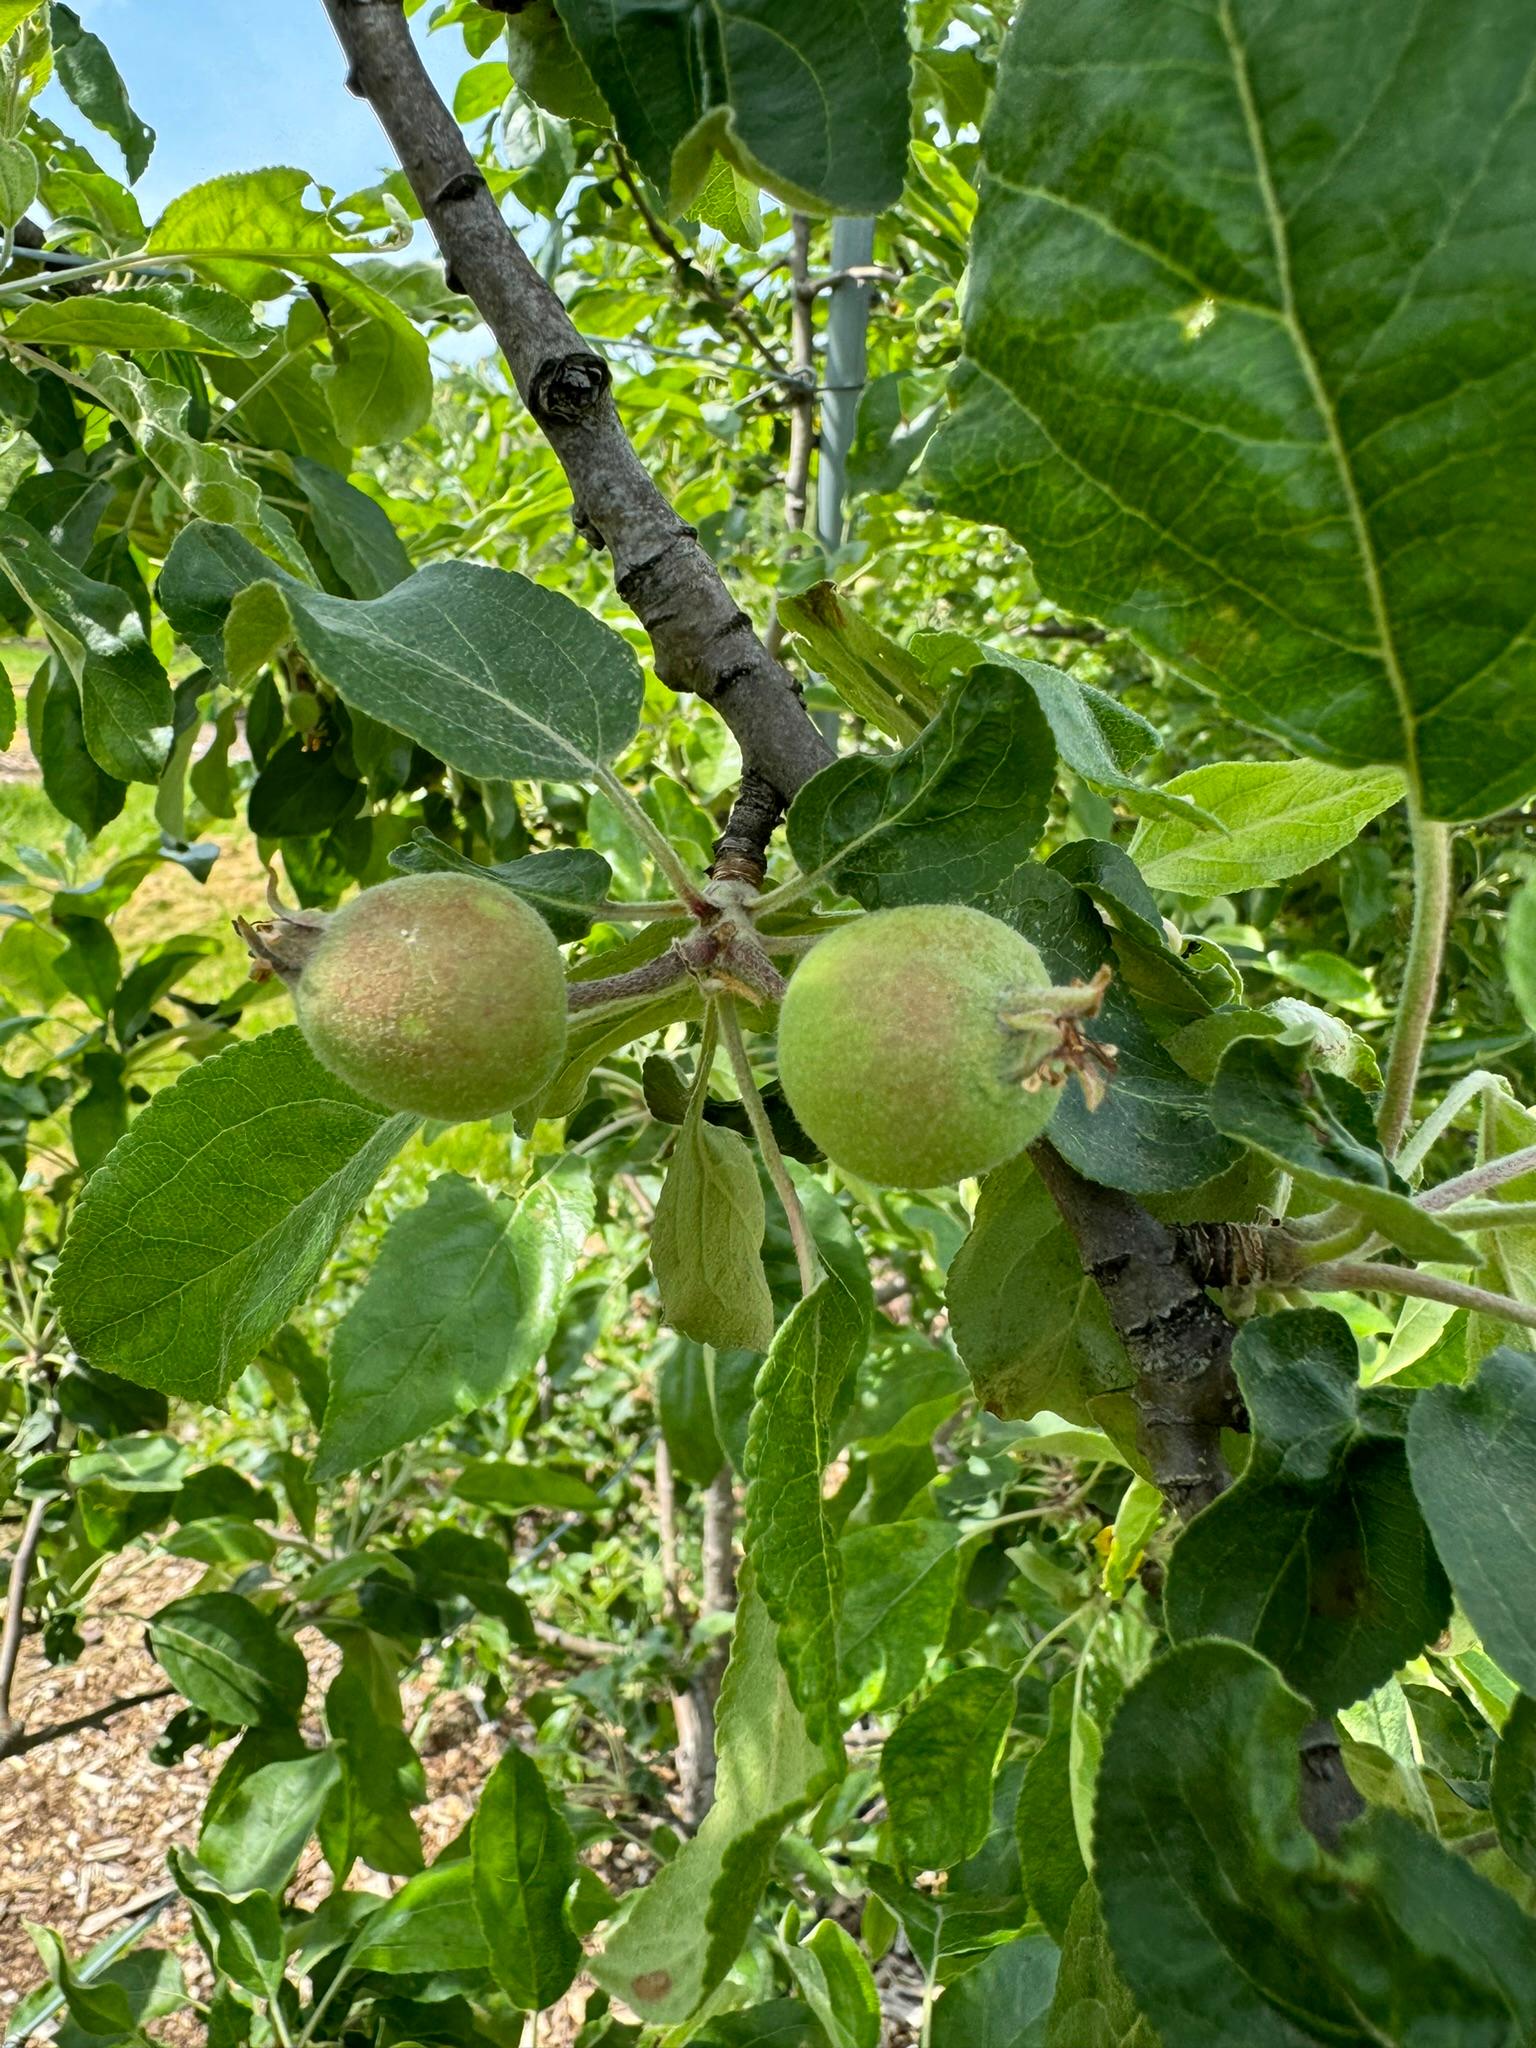 Apples hanging from a tree.